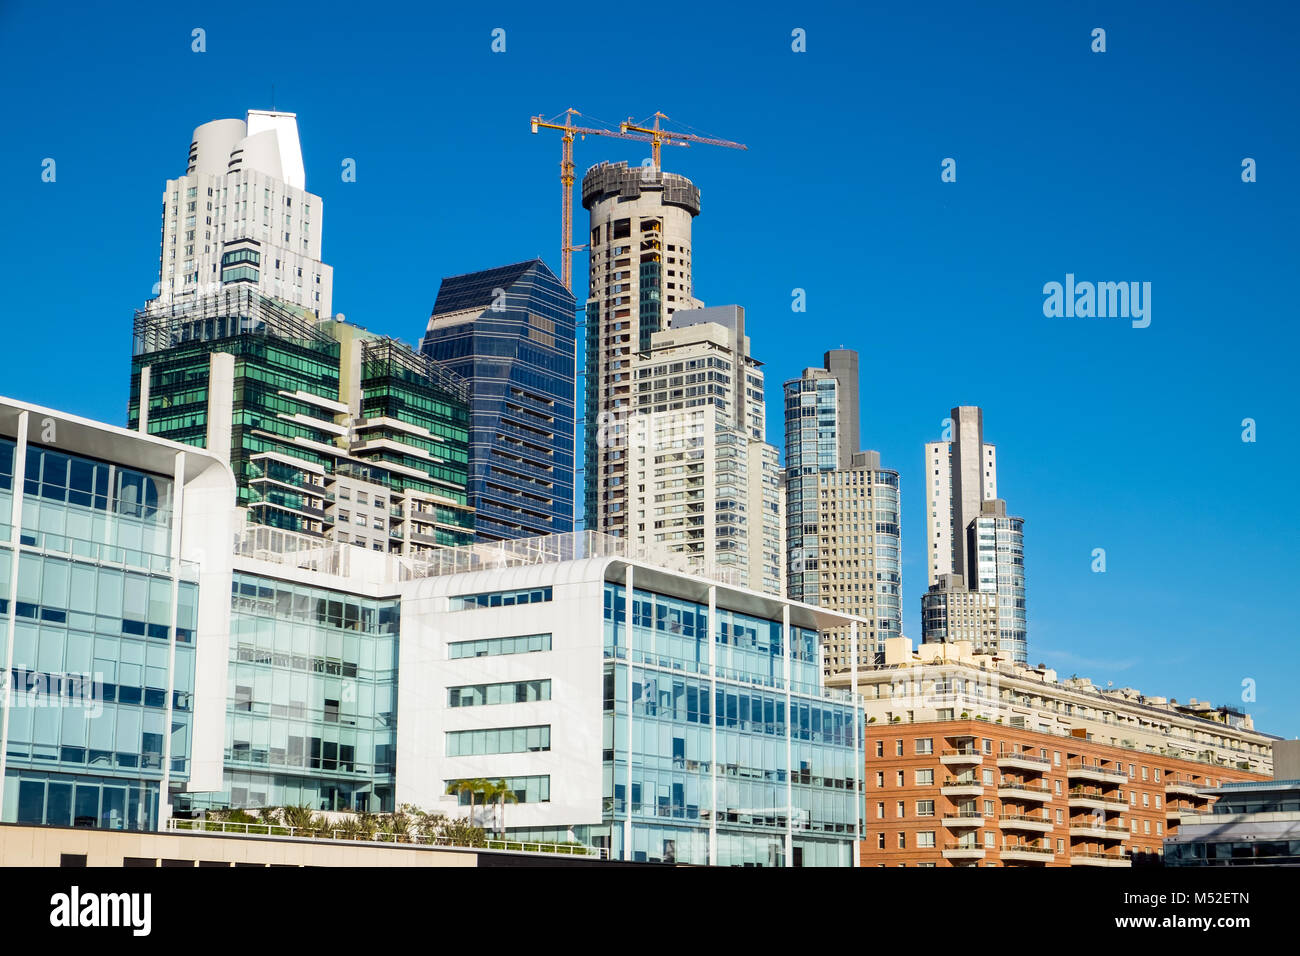 Skyscrapers seen in Puerto Madero, Buenos Aires, Argentina Stock Photo